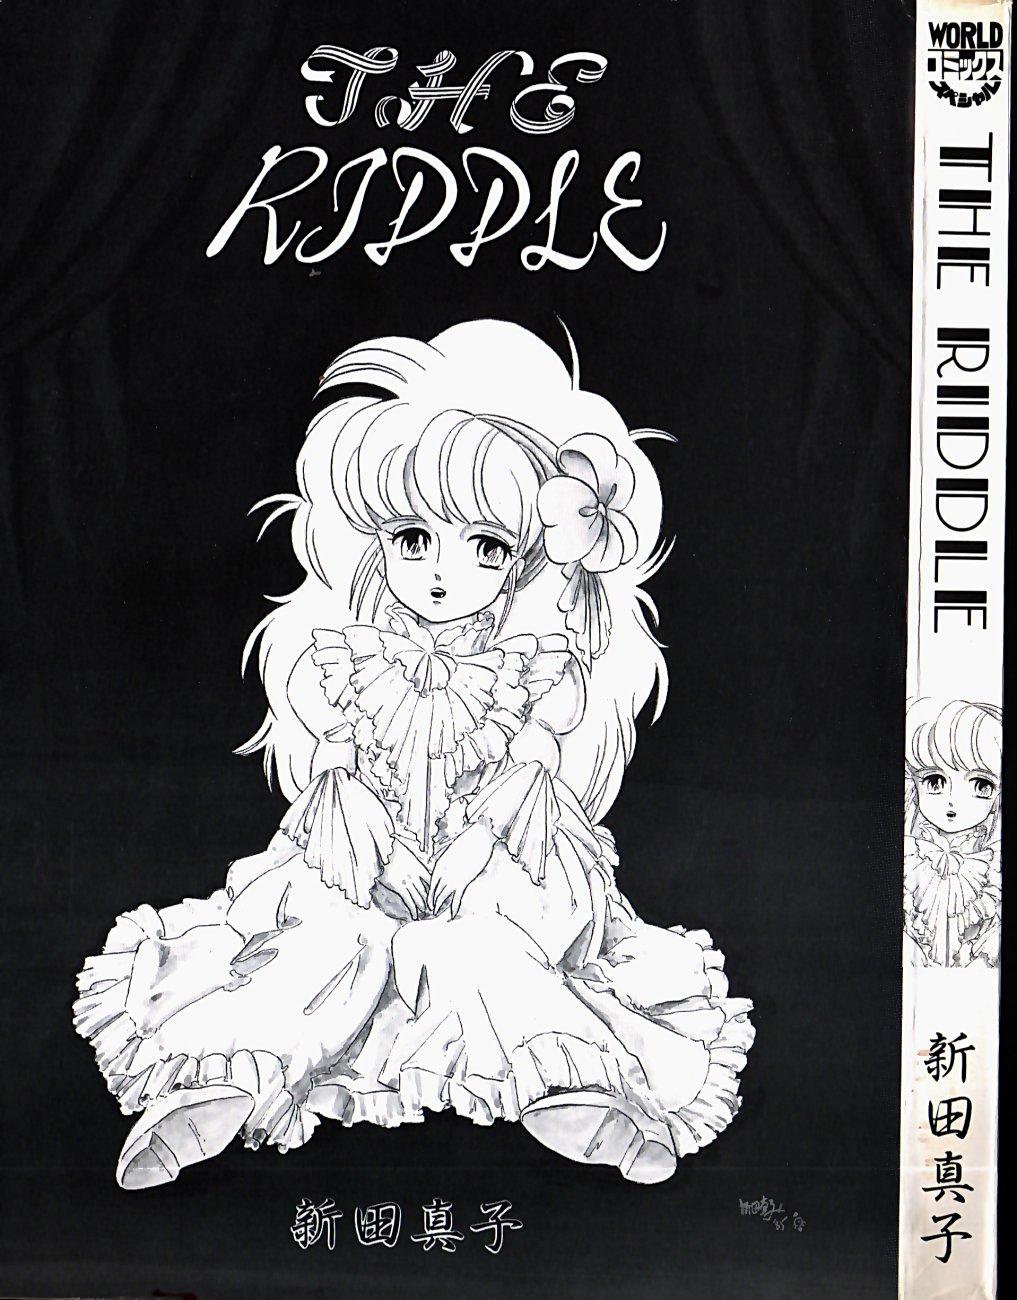 The Riddle 1